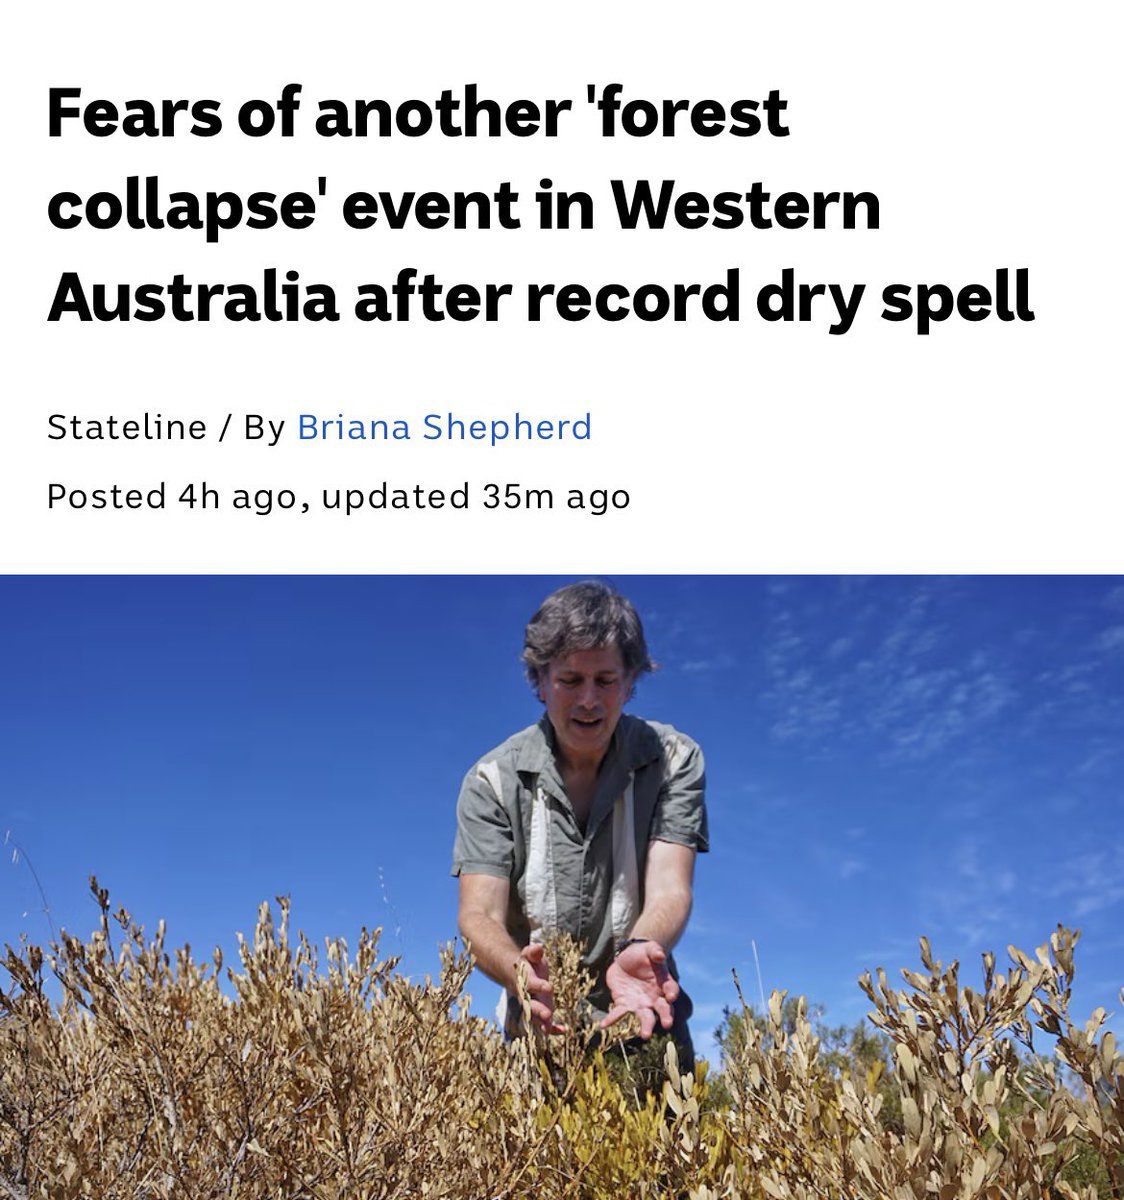 🚨Western Australia is facing a “forest collapse” event due to record high temps & the driest 6 months EVER Experts have recorded large swathes of dying flora from Denmark to Shark Bay What will it take for @walabor to stop supporting gas expansion? Look what we stand to lose!